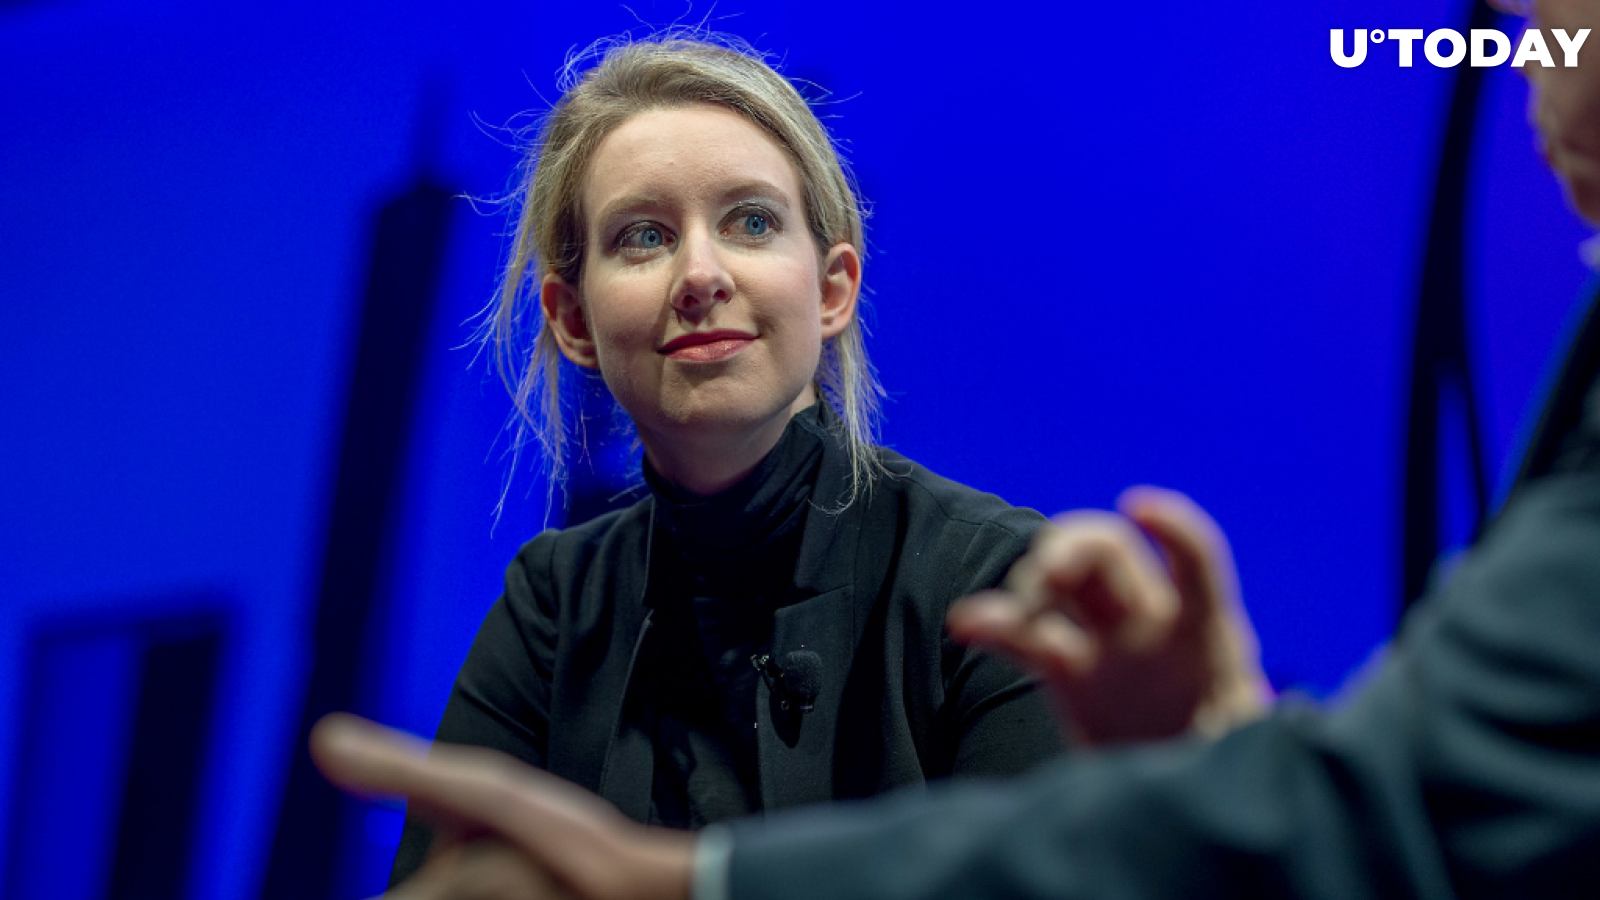 Theranos Stock Certificate to Be Sold as NFT by Early Investor